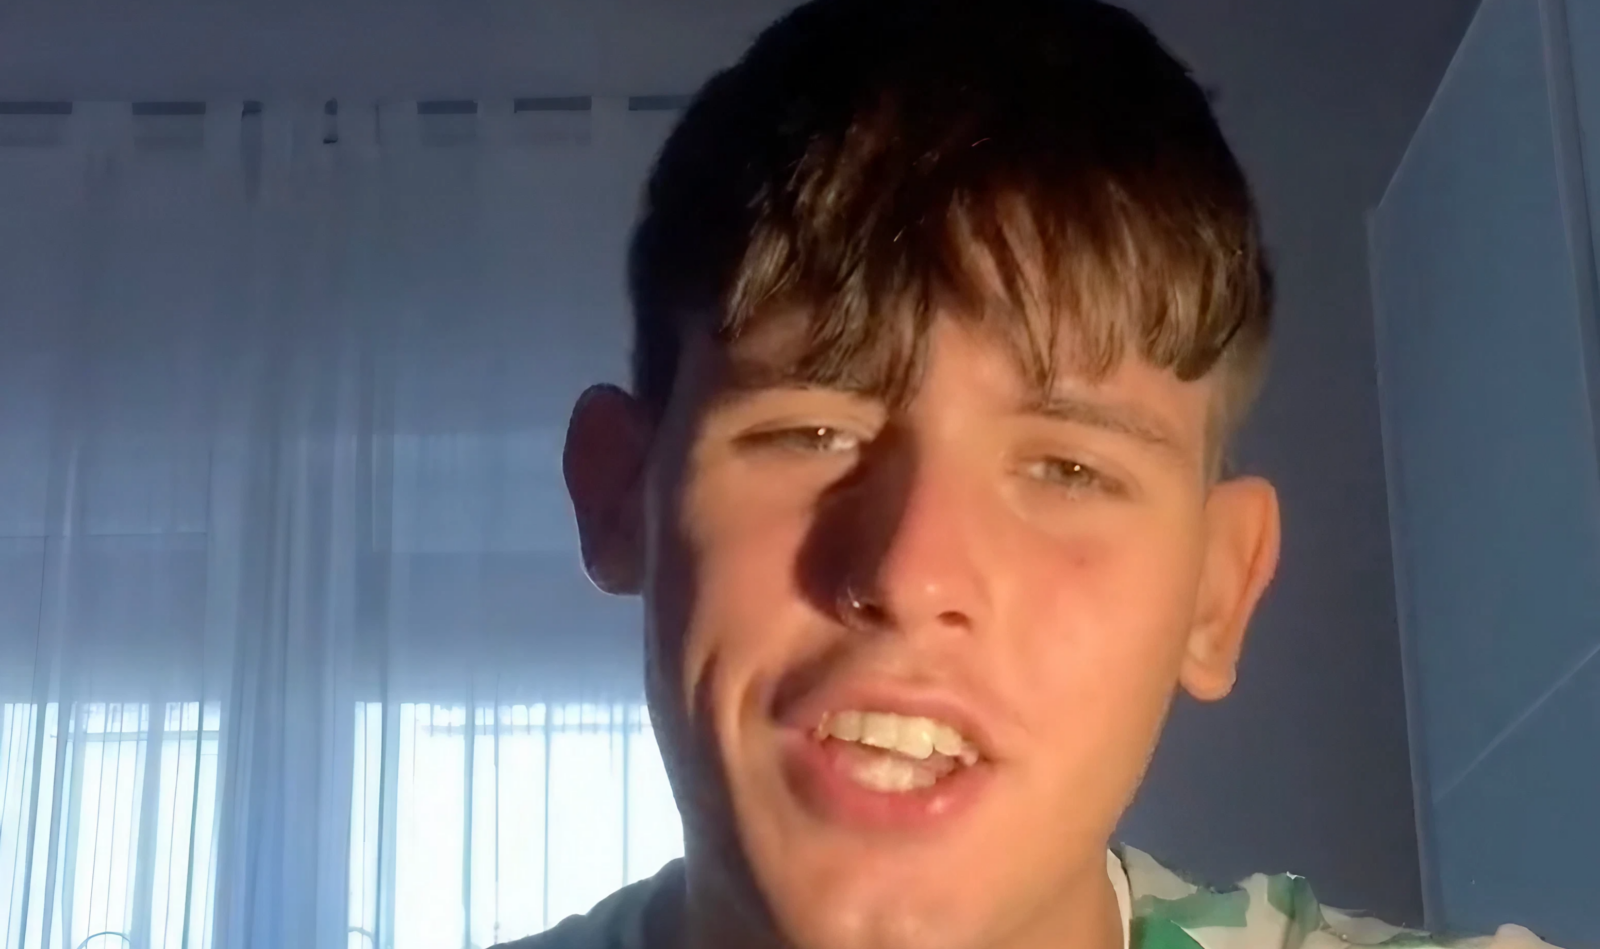 Firstborn rejected by friends speaks on TikTok